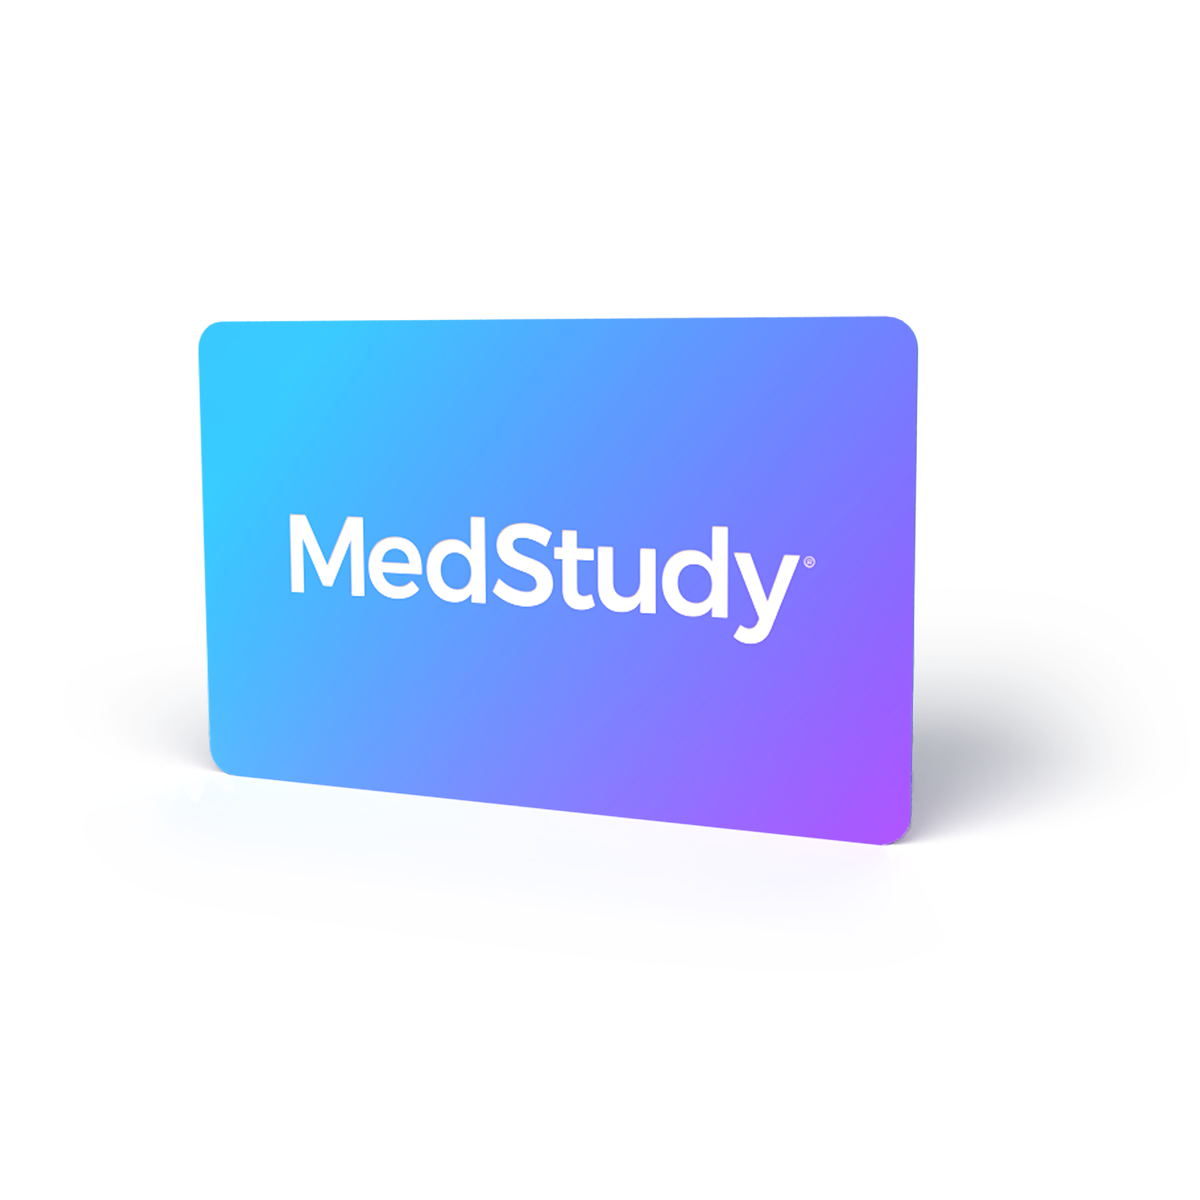 A MedStudy digital gift card. Card is a blue to purple blend with a white MedStudy logo in the center.